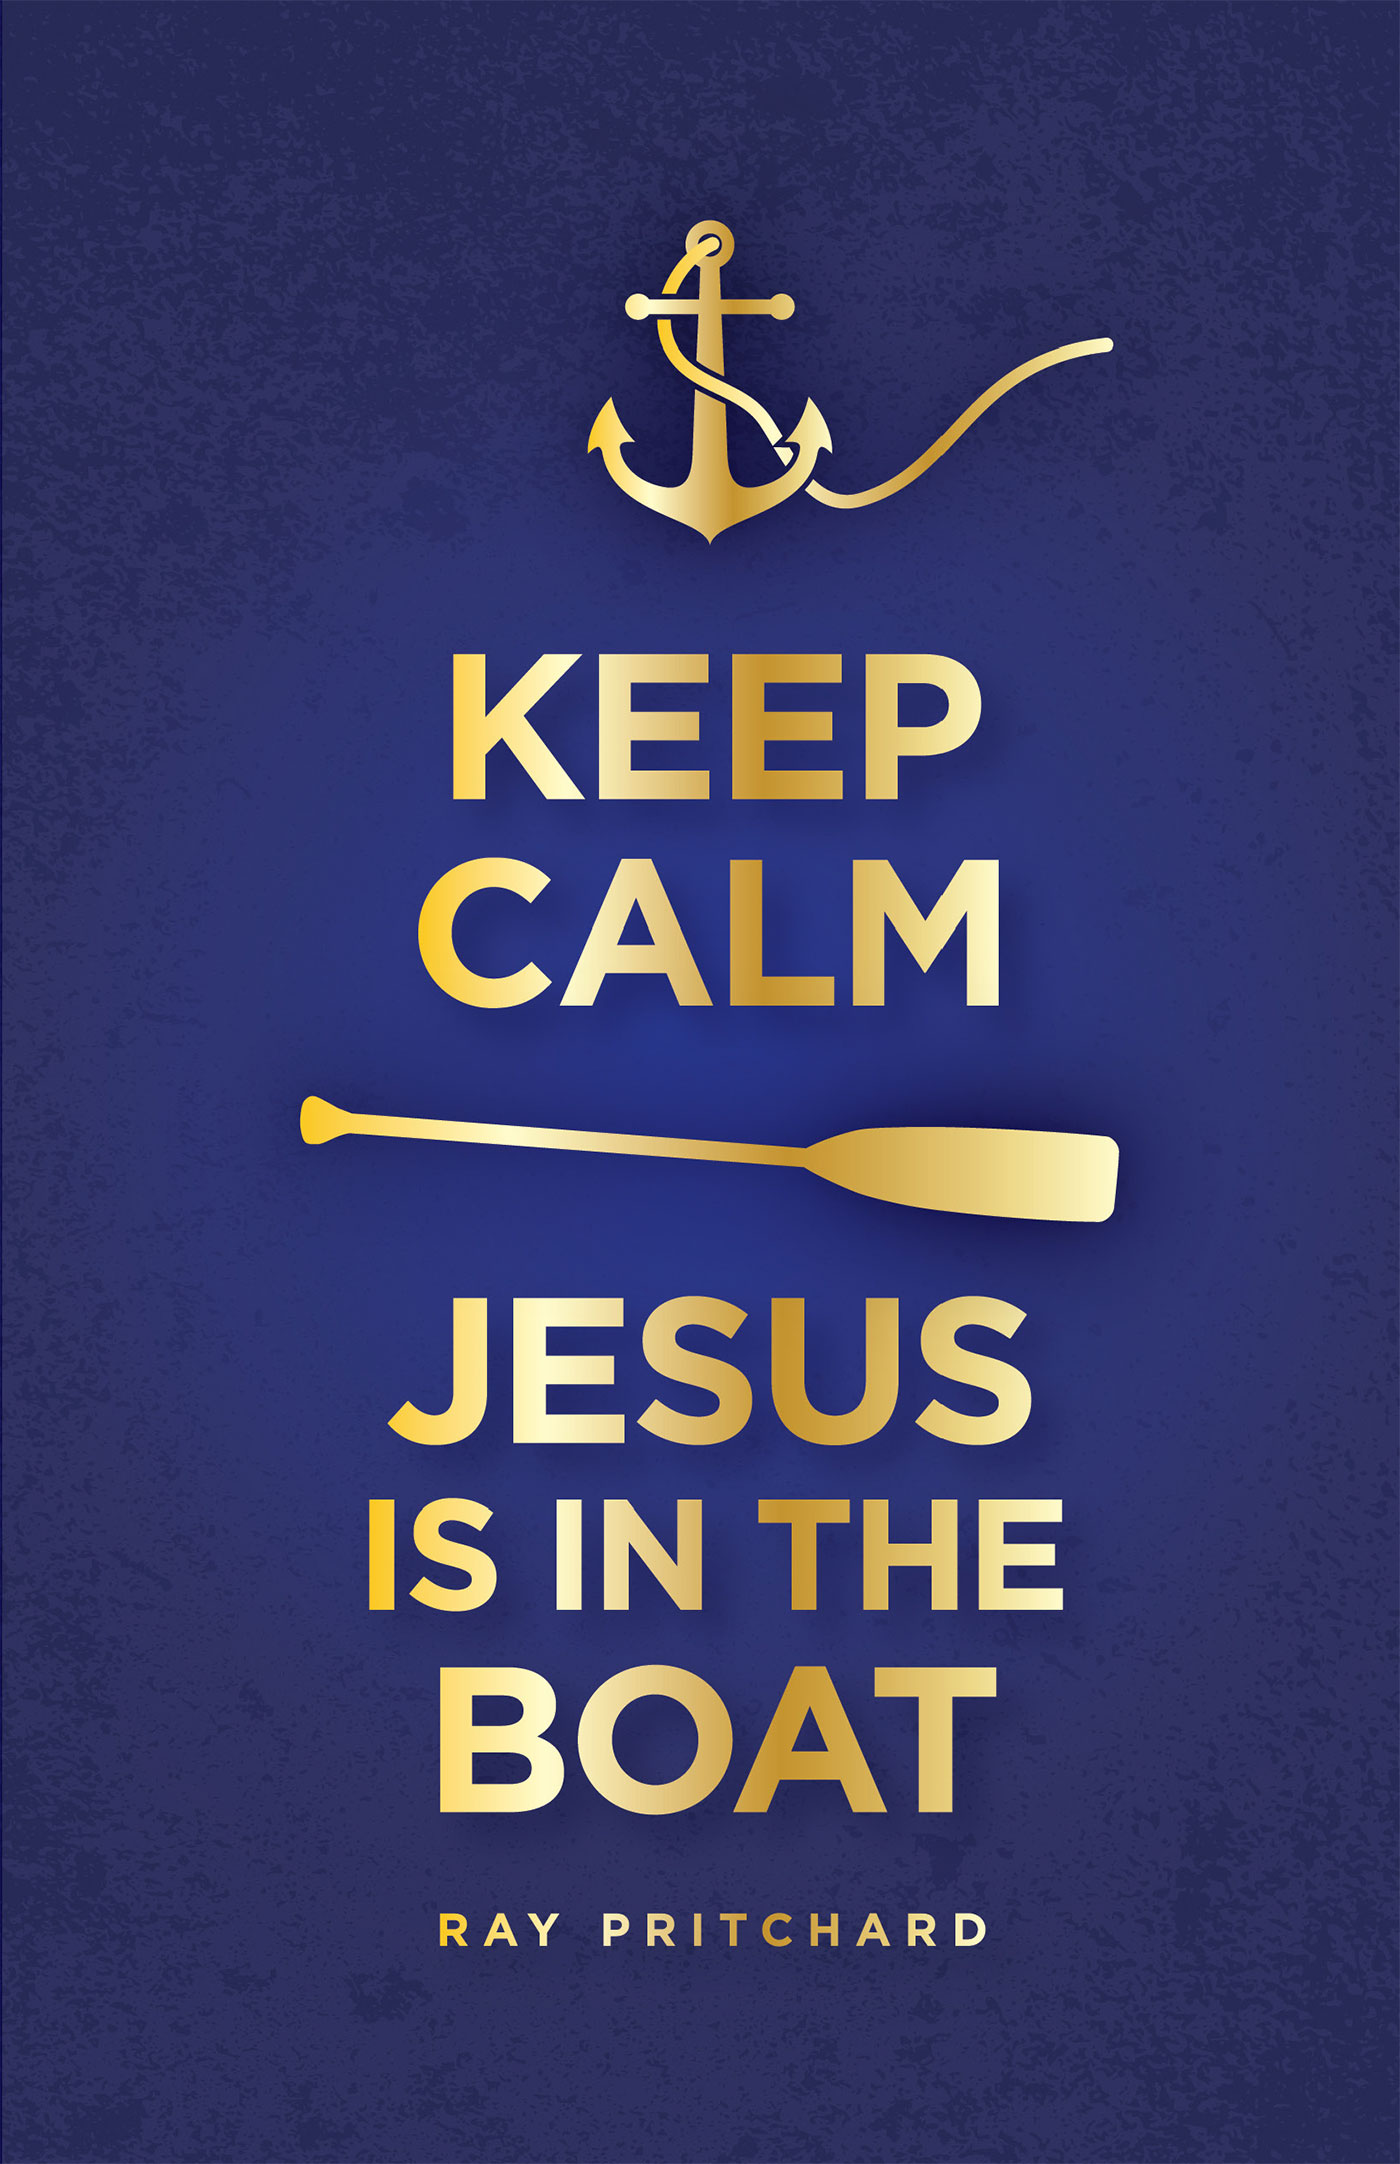 Keep Calm Jesus is in the Boat